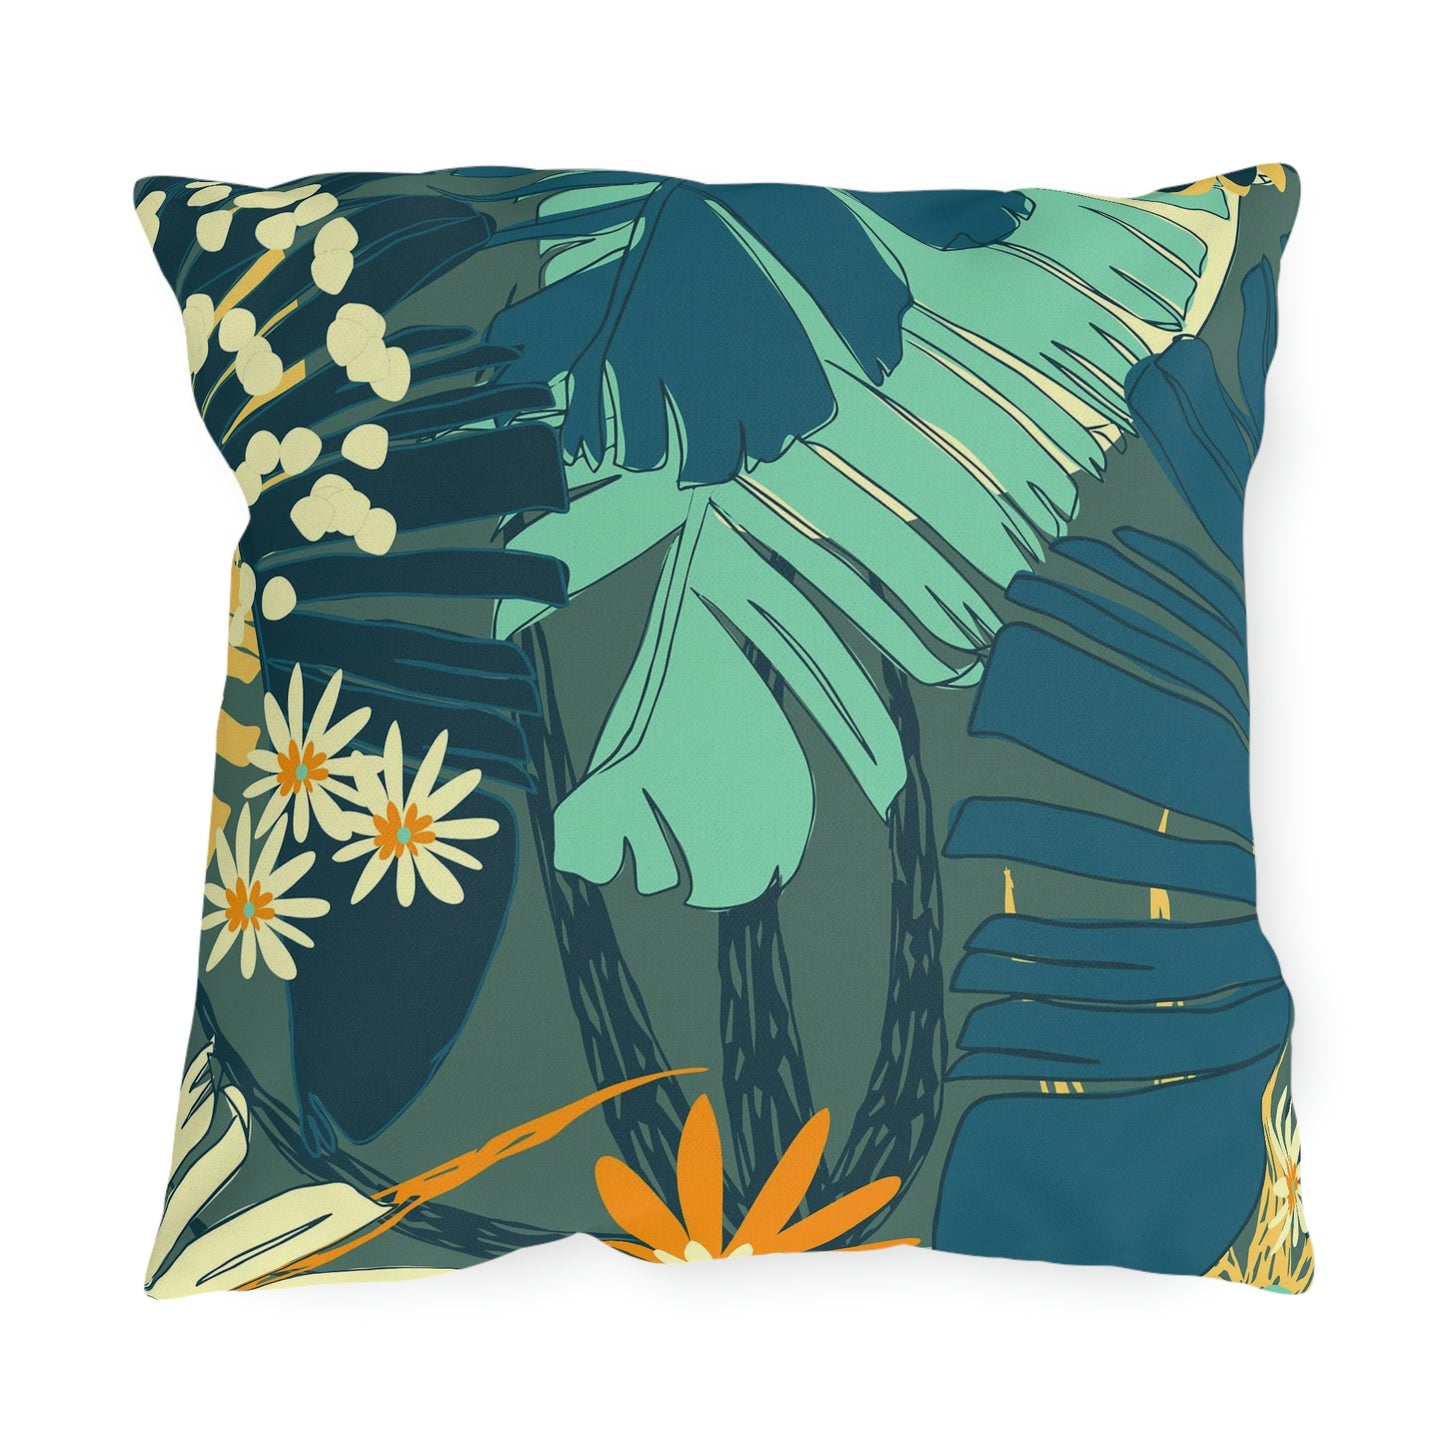 Jungle Blues Collection, Tropical Jungle Leaf Print Outdoor Pillows